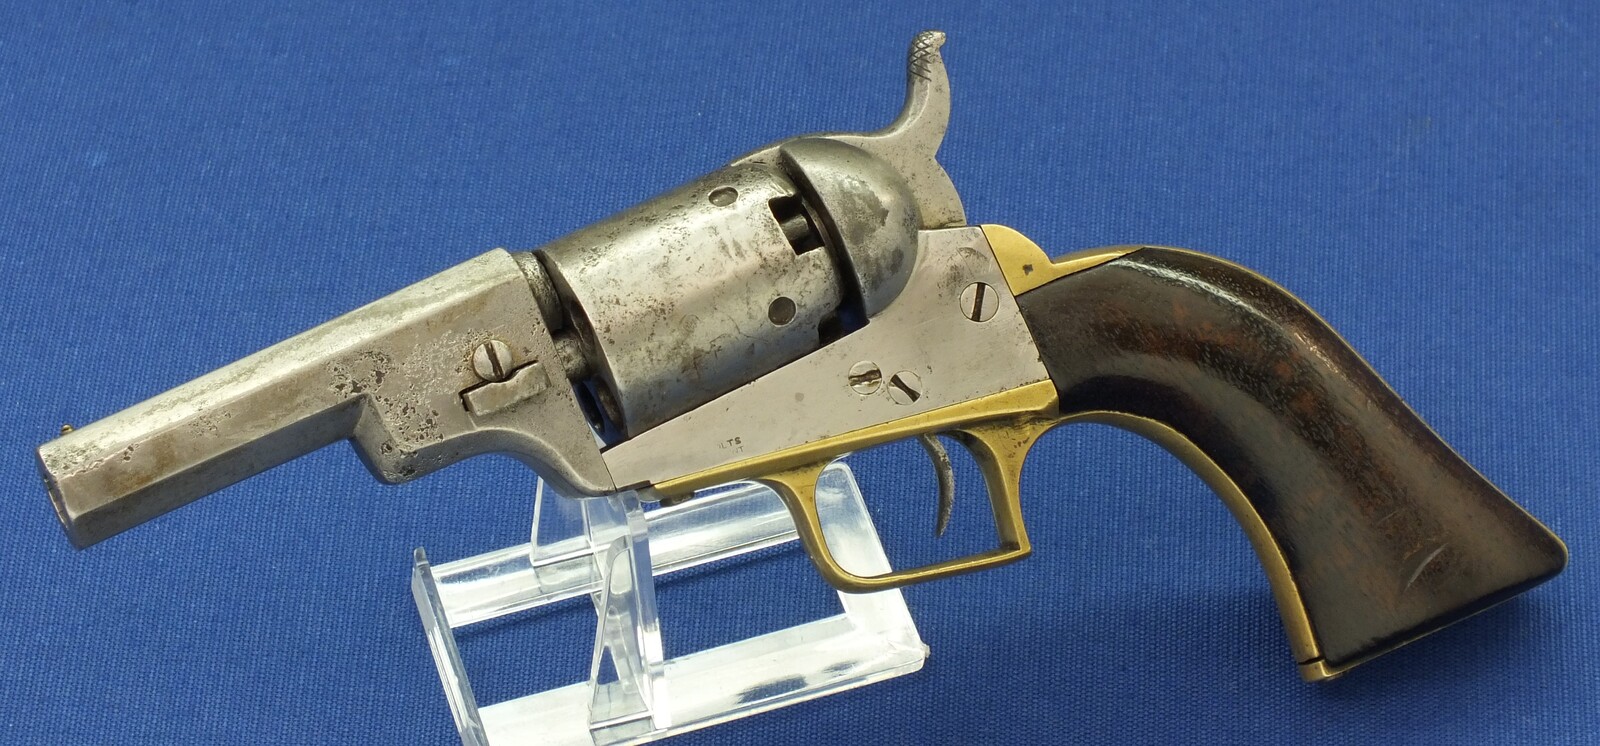 A rare antique American Colt Model 1848 Baby Dragoon 5 shot Pocket Percussion Revolver. 31 Caliber. 3 inch Barrel with New York address. Length 23cm. in good/very good condition. Price 3.350 euro.